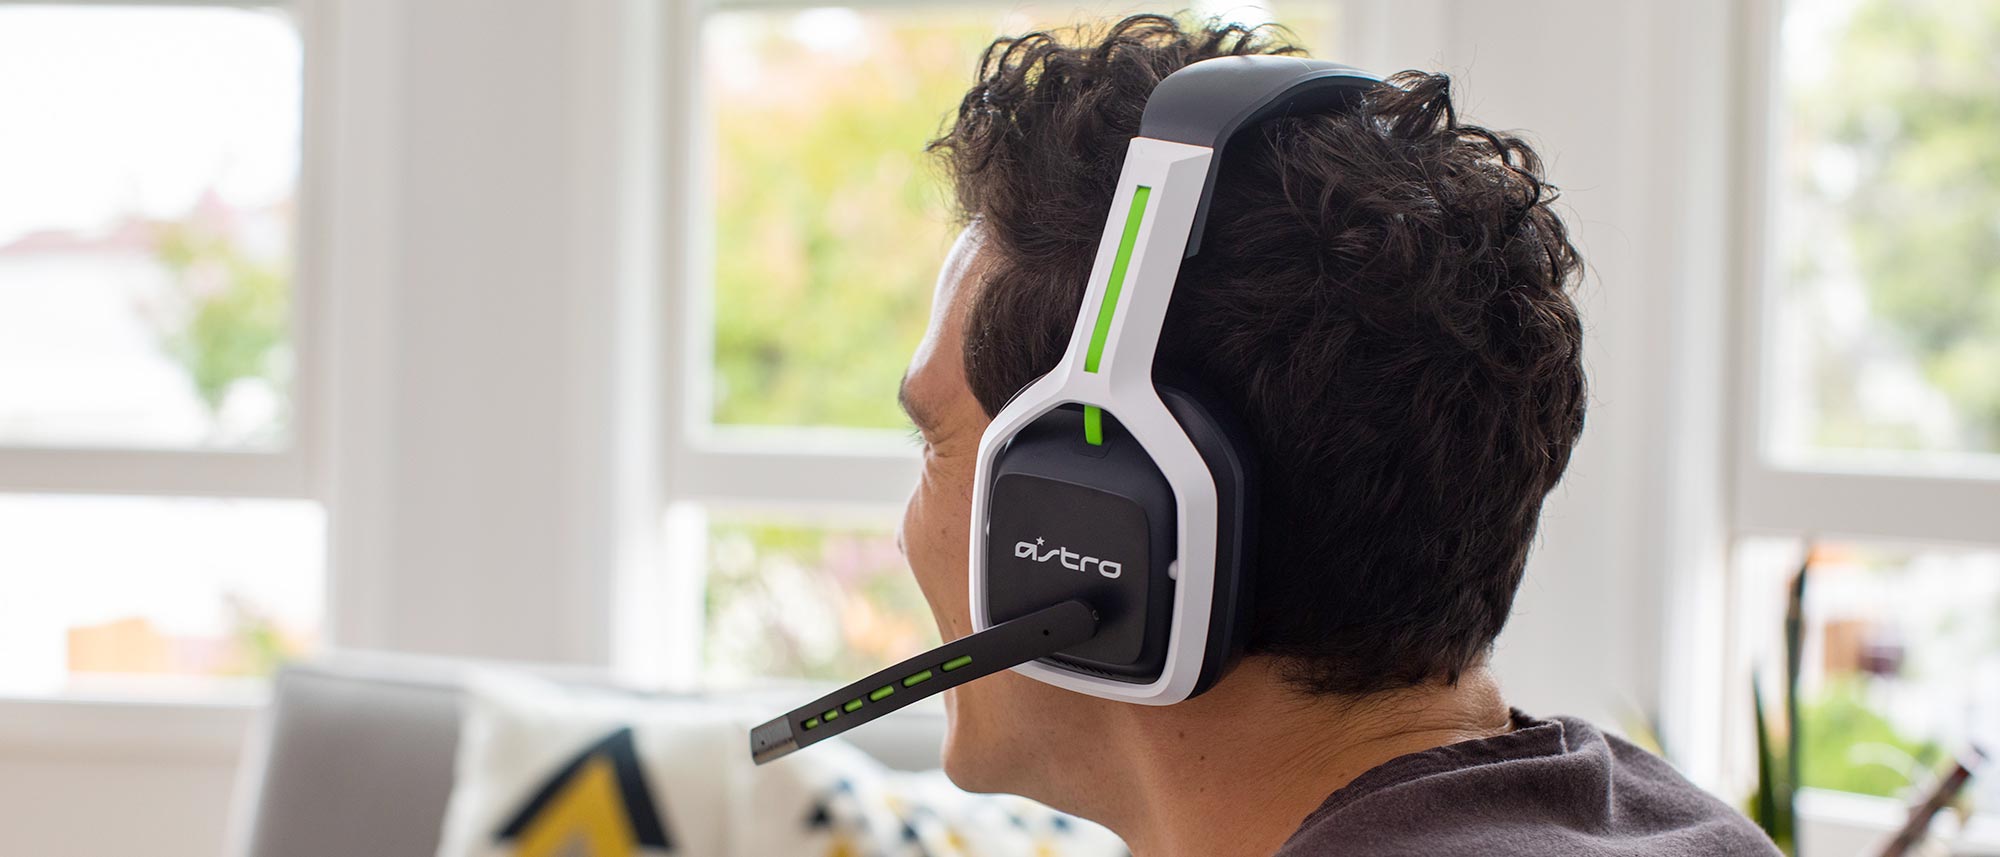 astro a20 xbox one headset